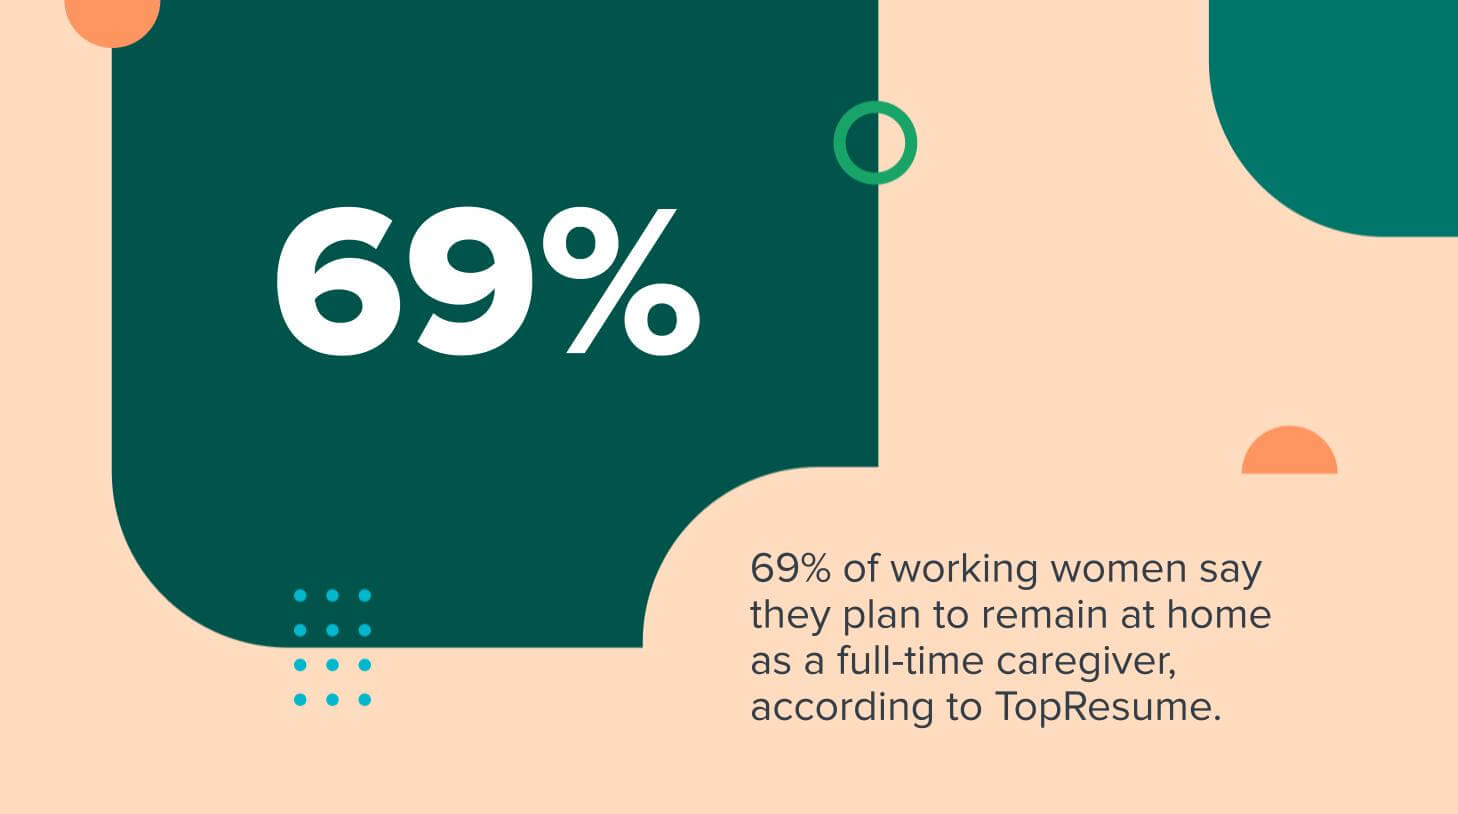 A new survey released by resume review service TopResume finds that 69% of working women say they plan to remain at home as a full-time caregiver.